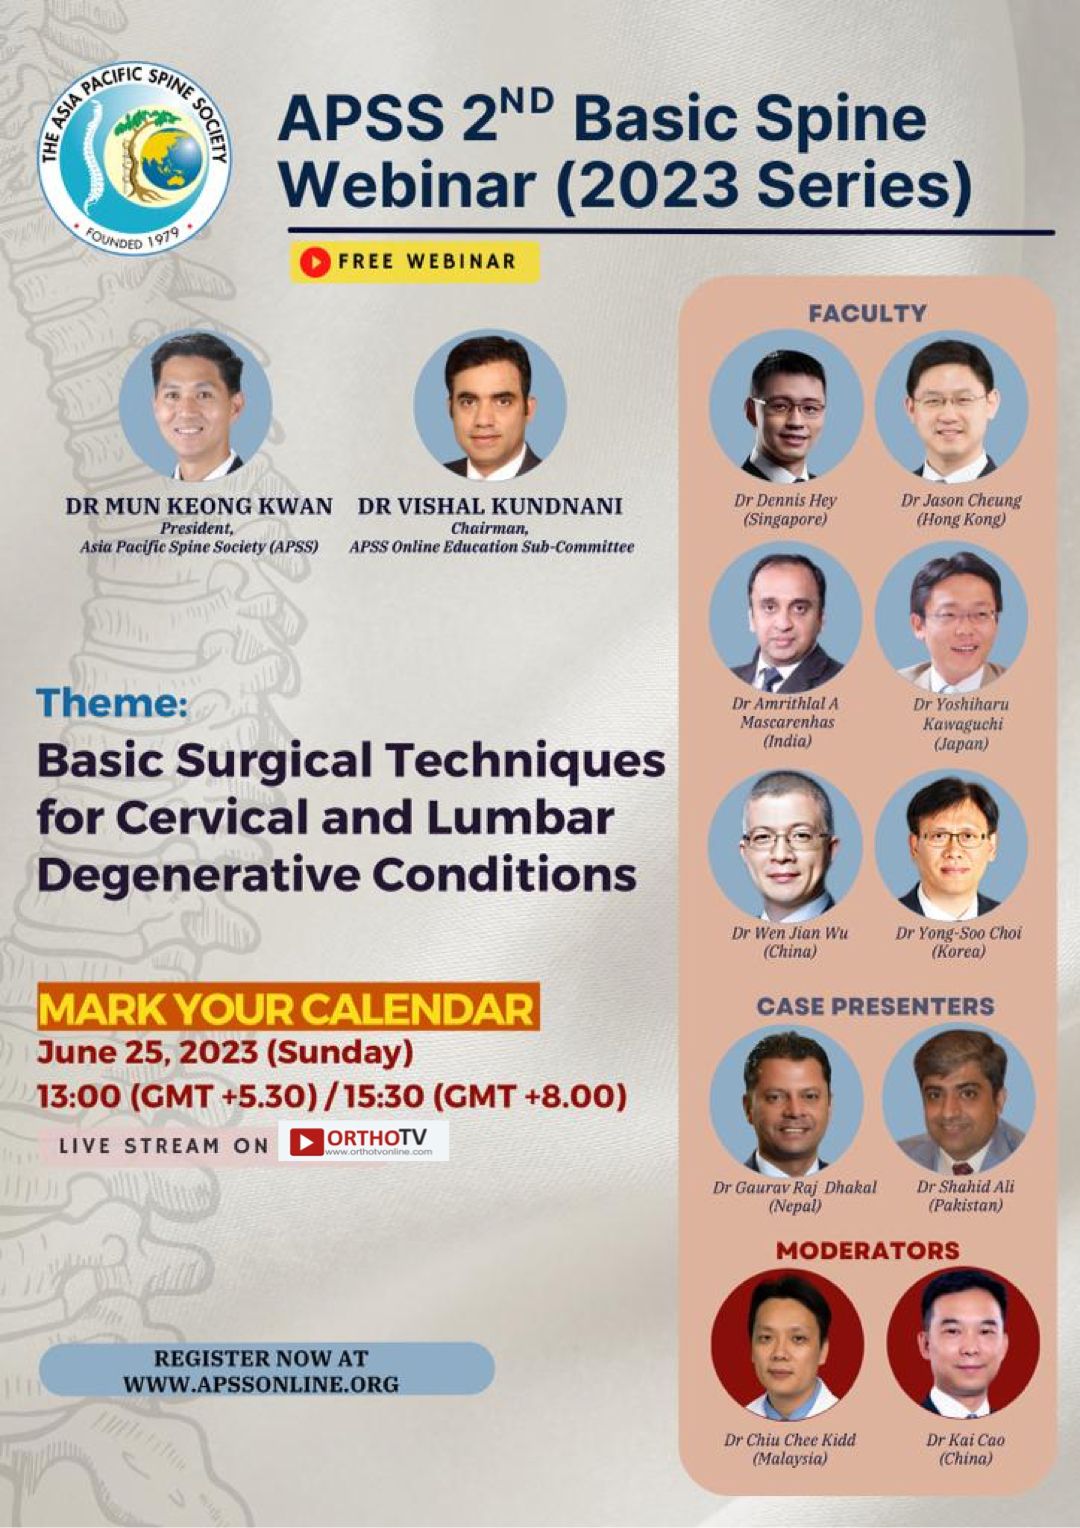 APSS 2ND Basic Spine Webinar : Basic Surgical Techniques for Cervical and Lumbar Degenerative Conditions